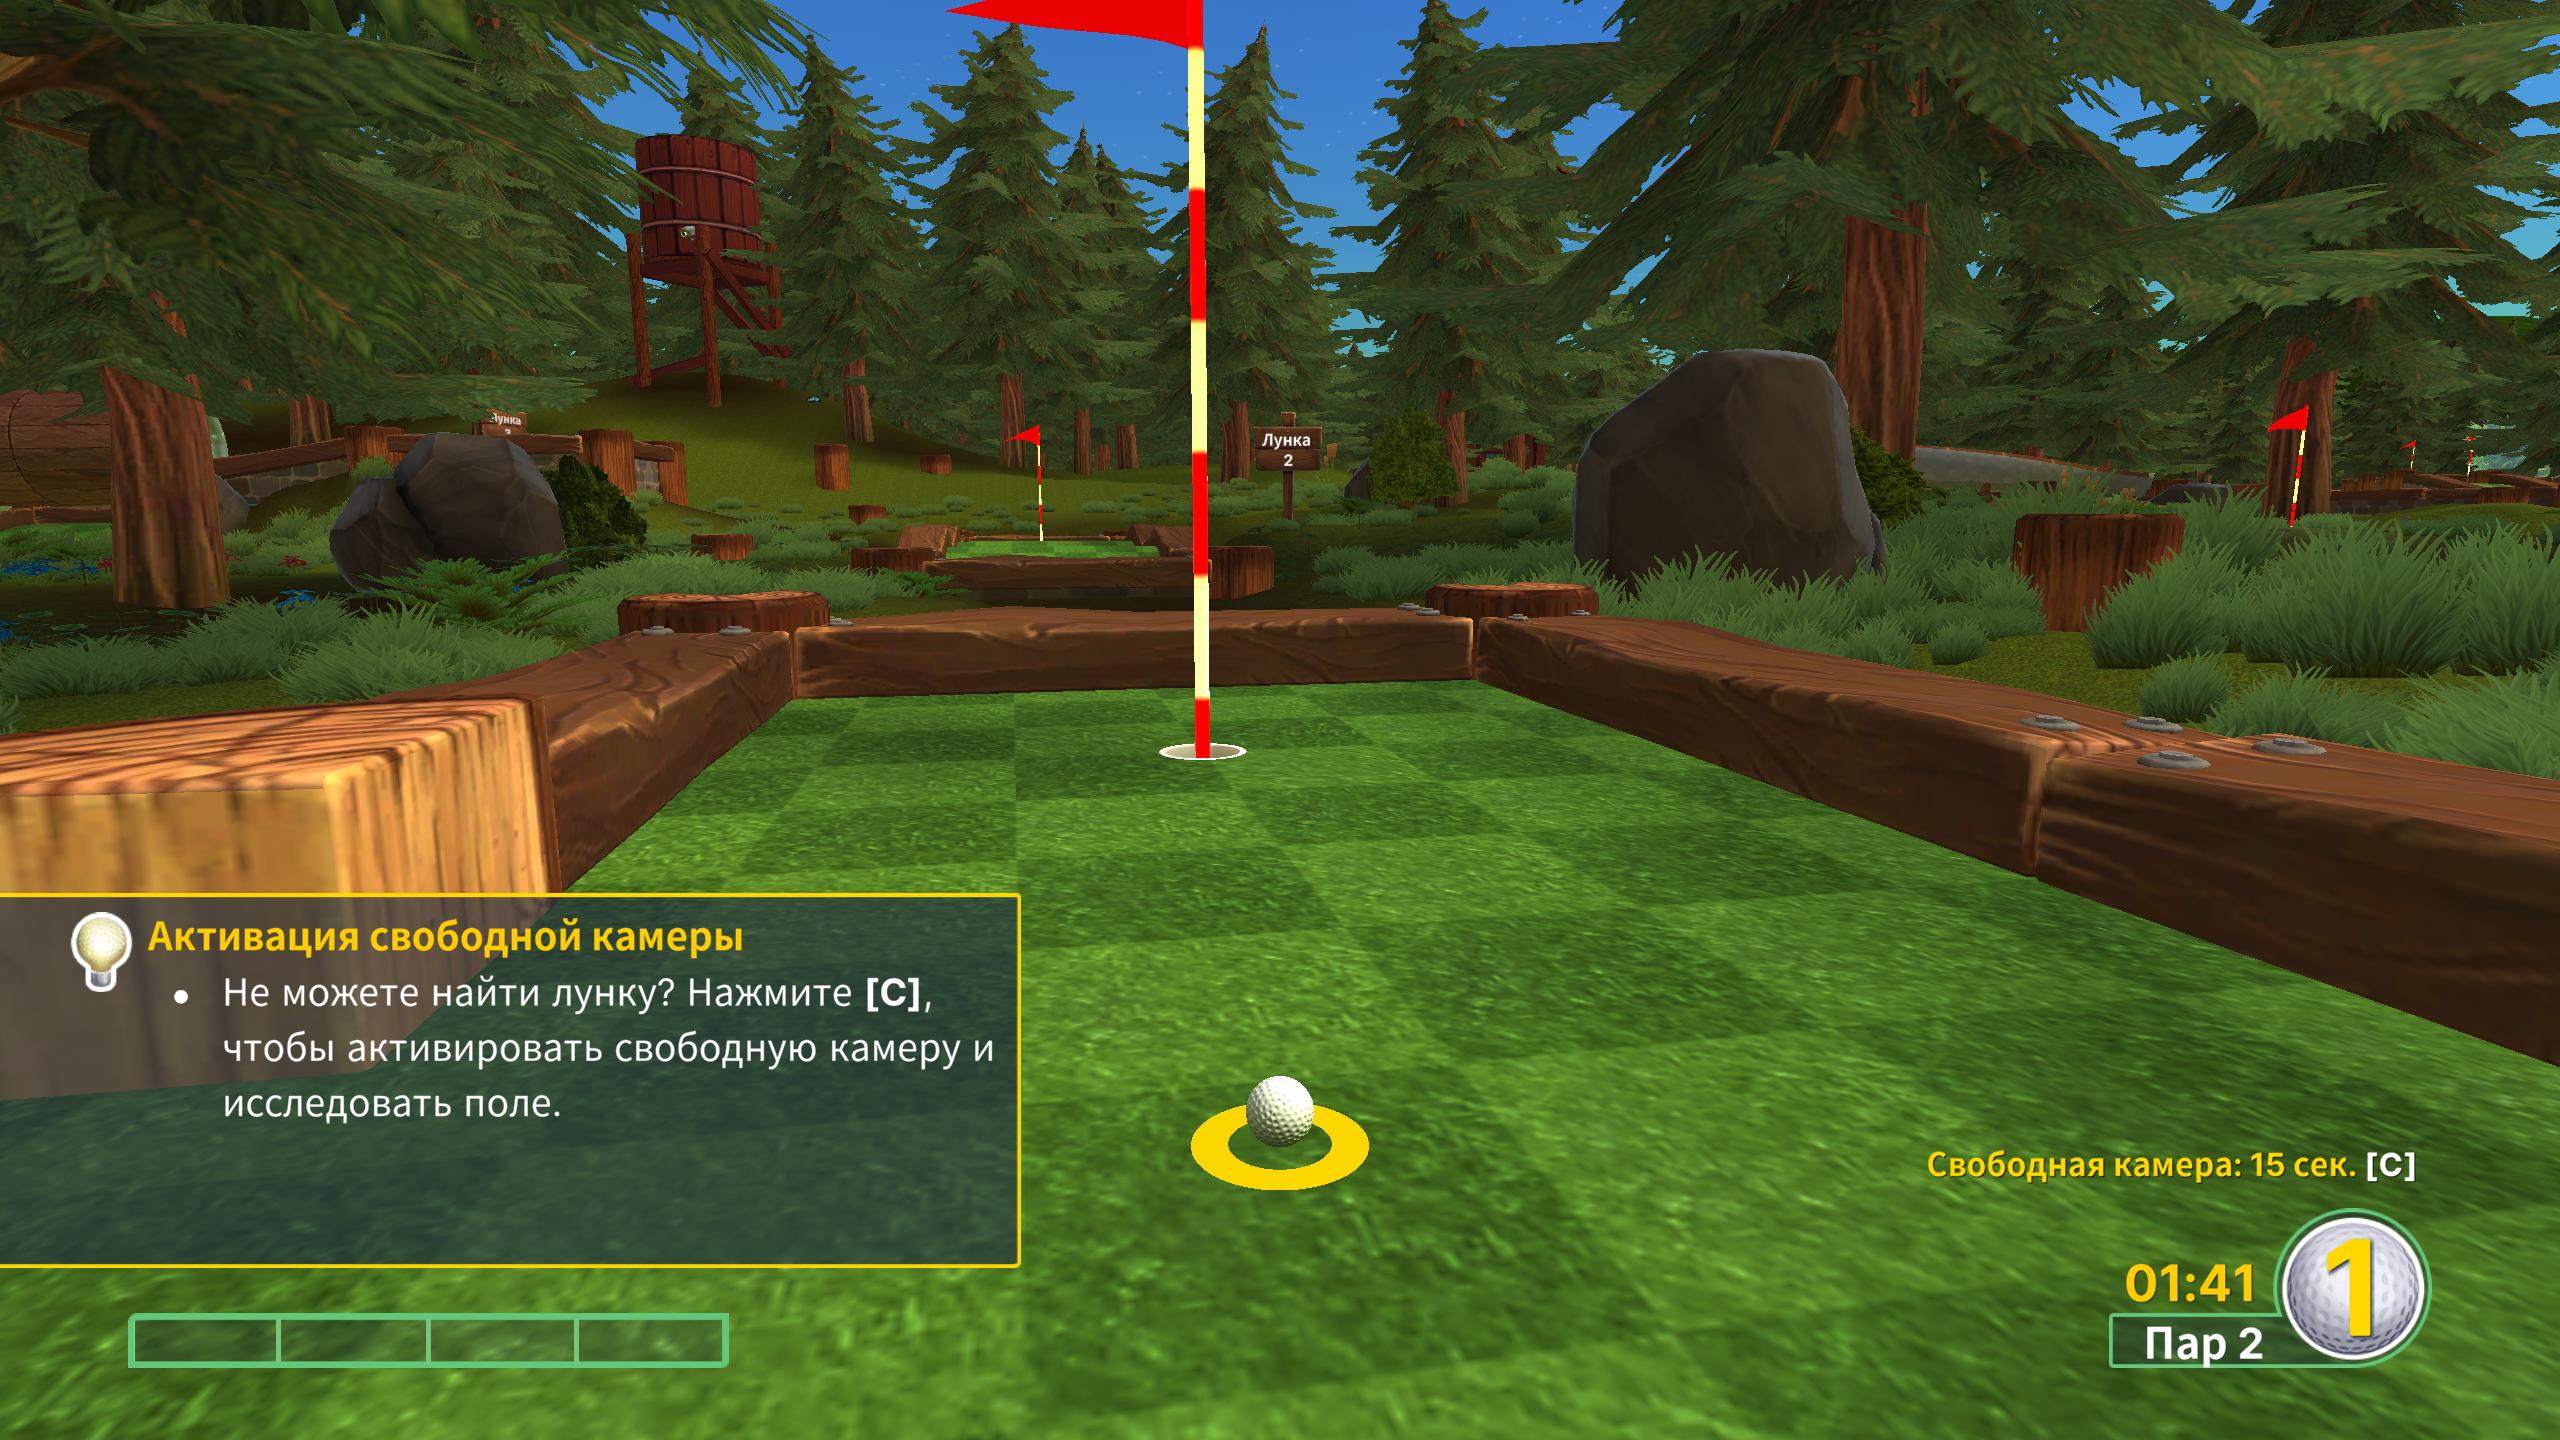 golf with your friends steam download